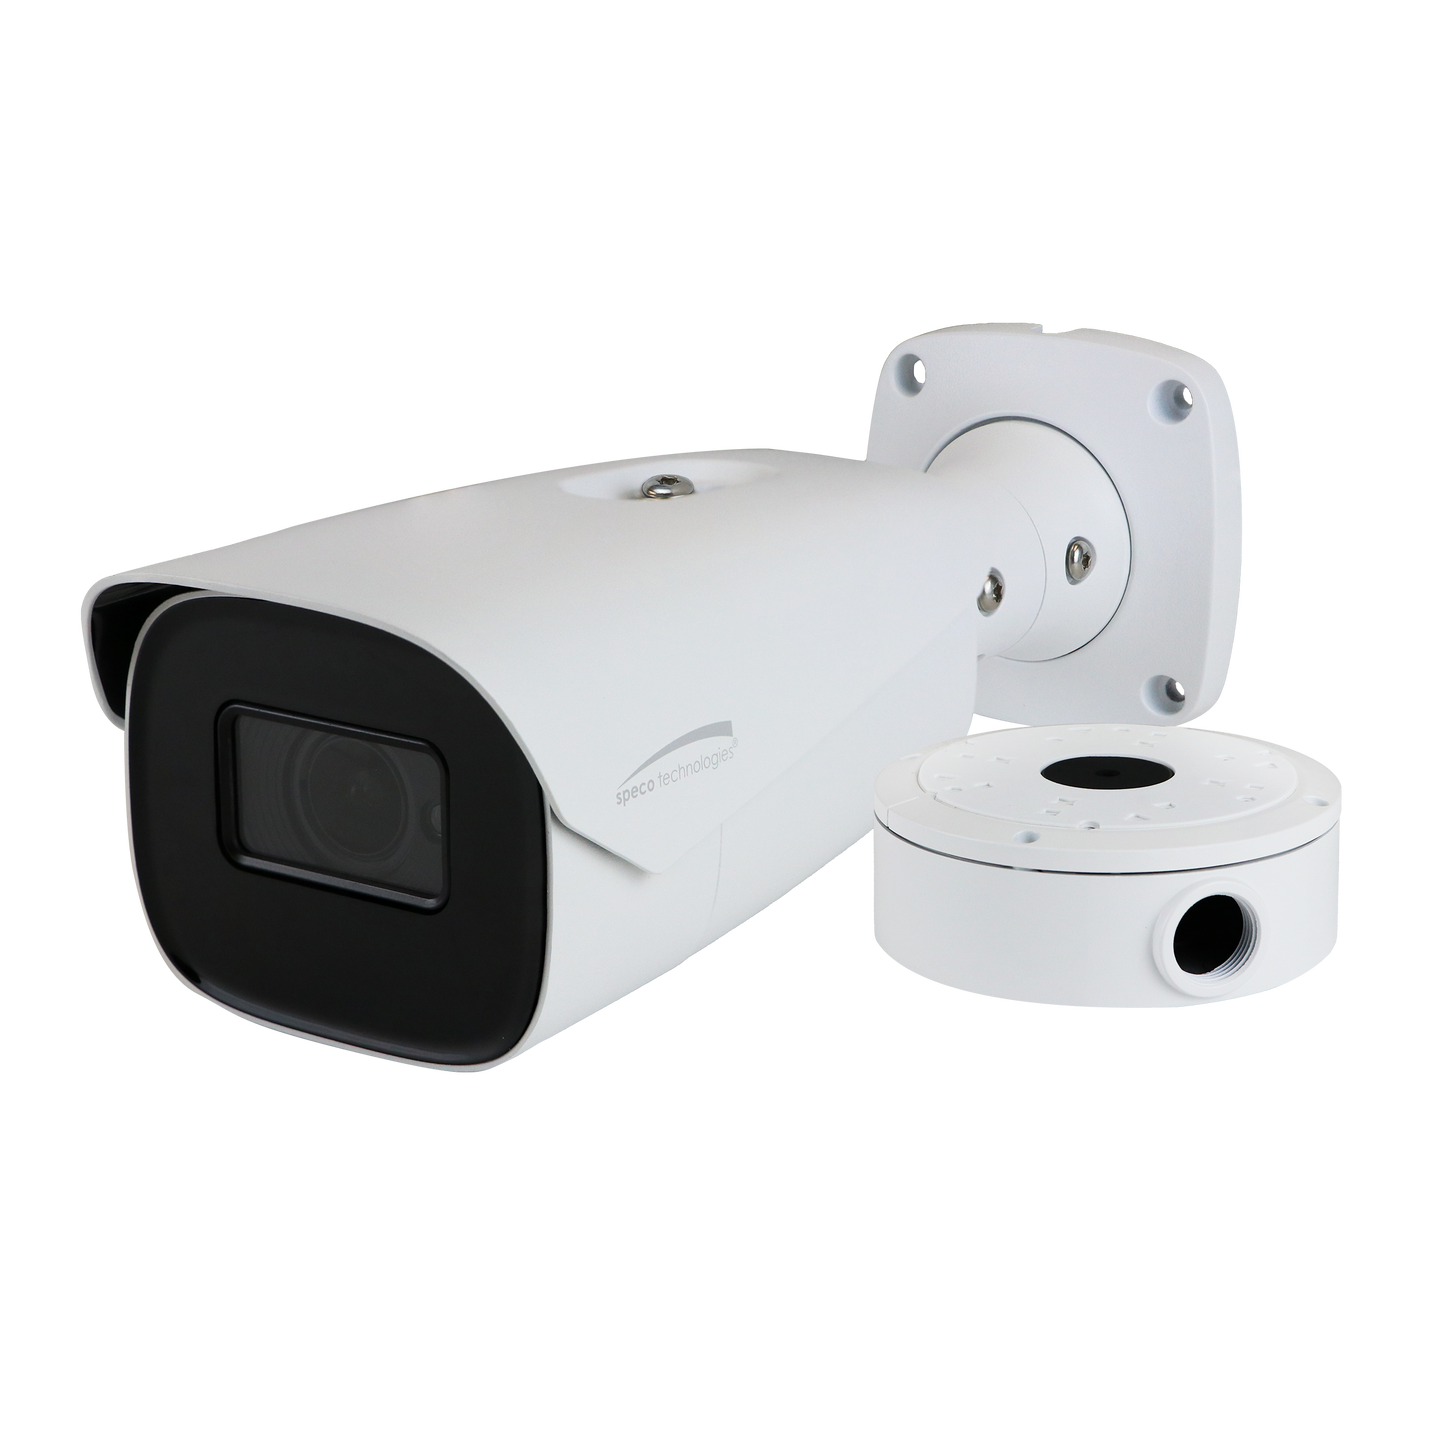 5MP IP Bullet Camera with Advanced Analytics 2.8-12mm motorized lens